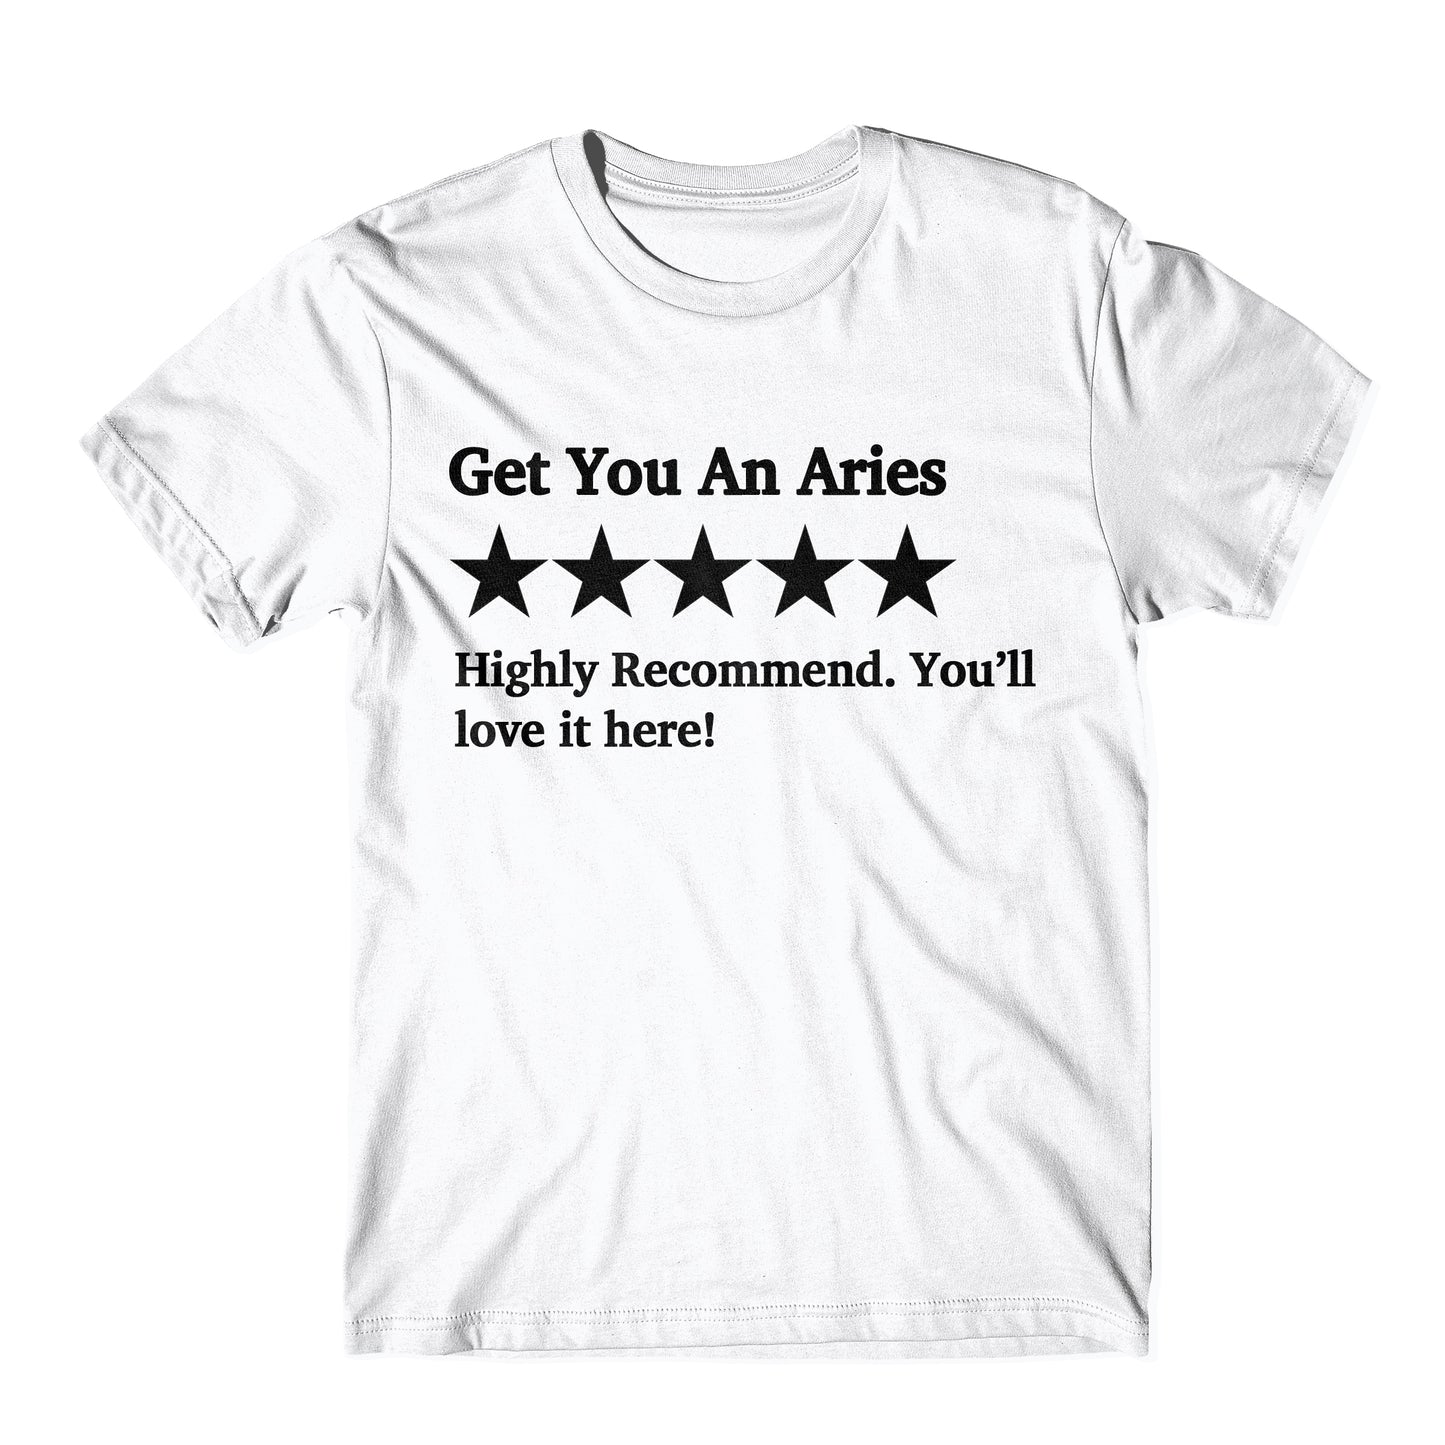 "Get You An Aries Five Star Rating" Tee